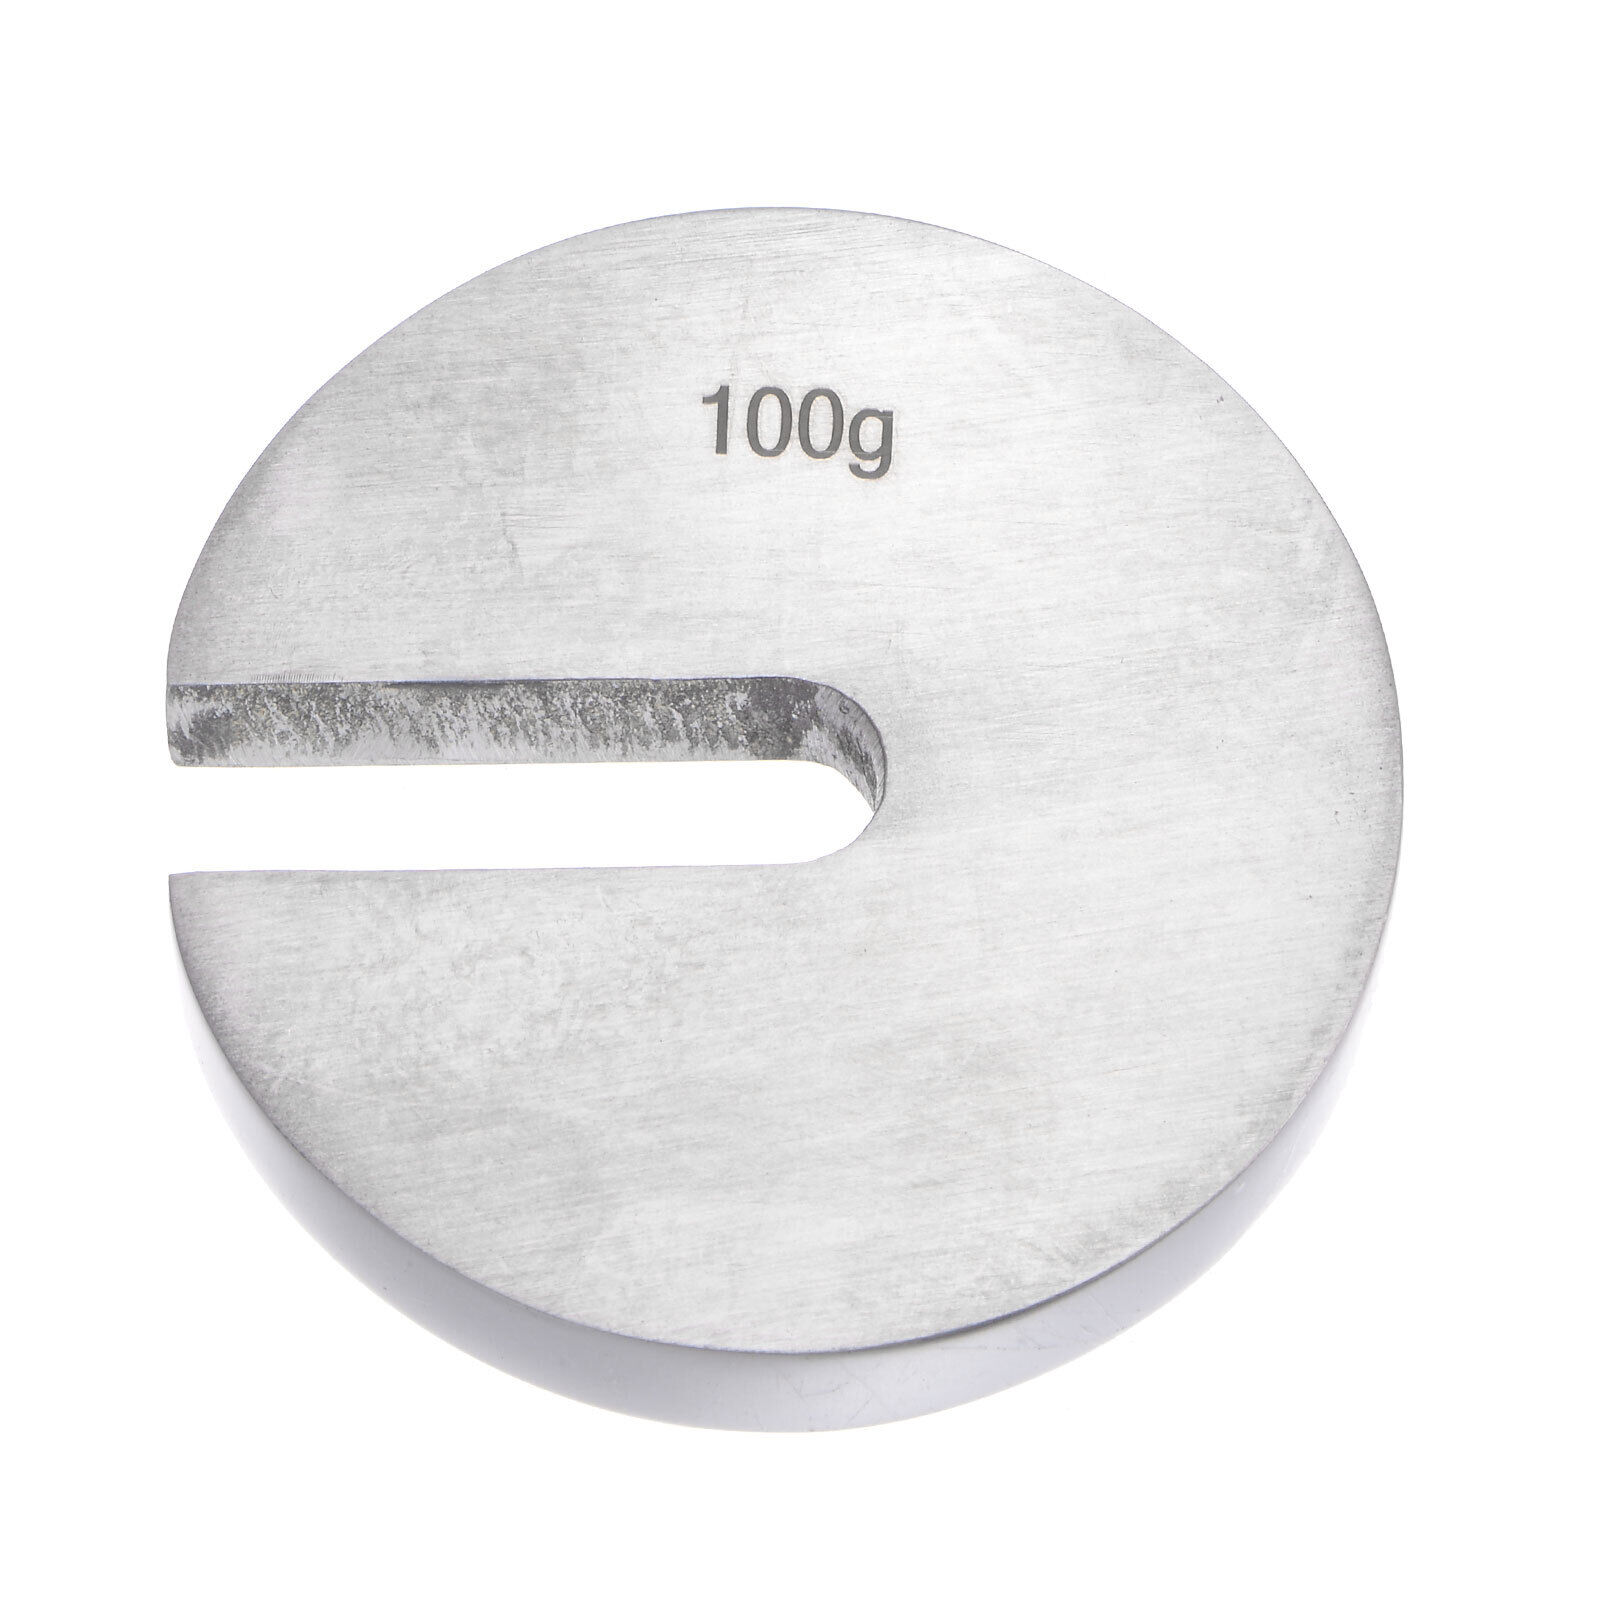 Slotted Calibration Weight 100g M1 Precision For Digital Balance Scales